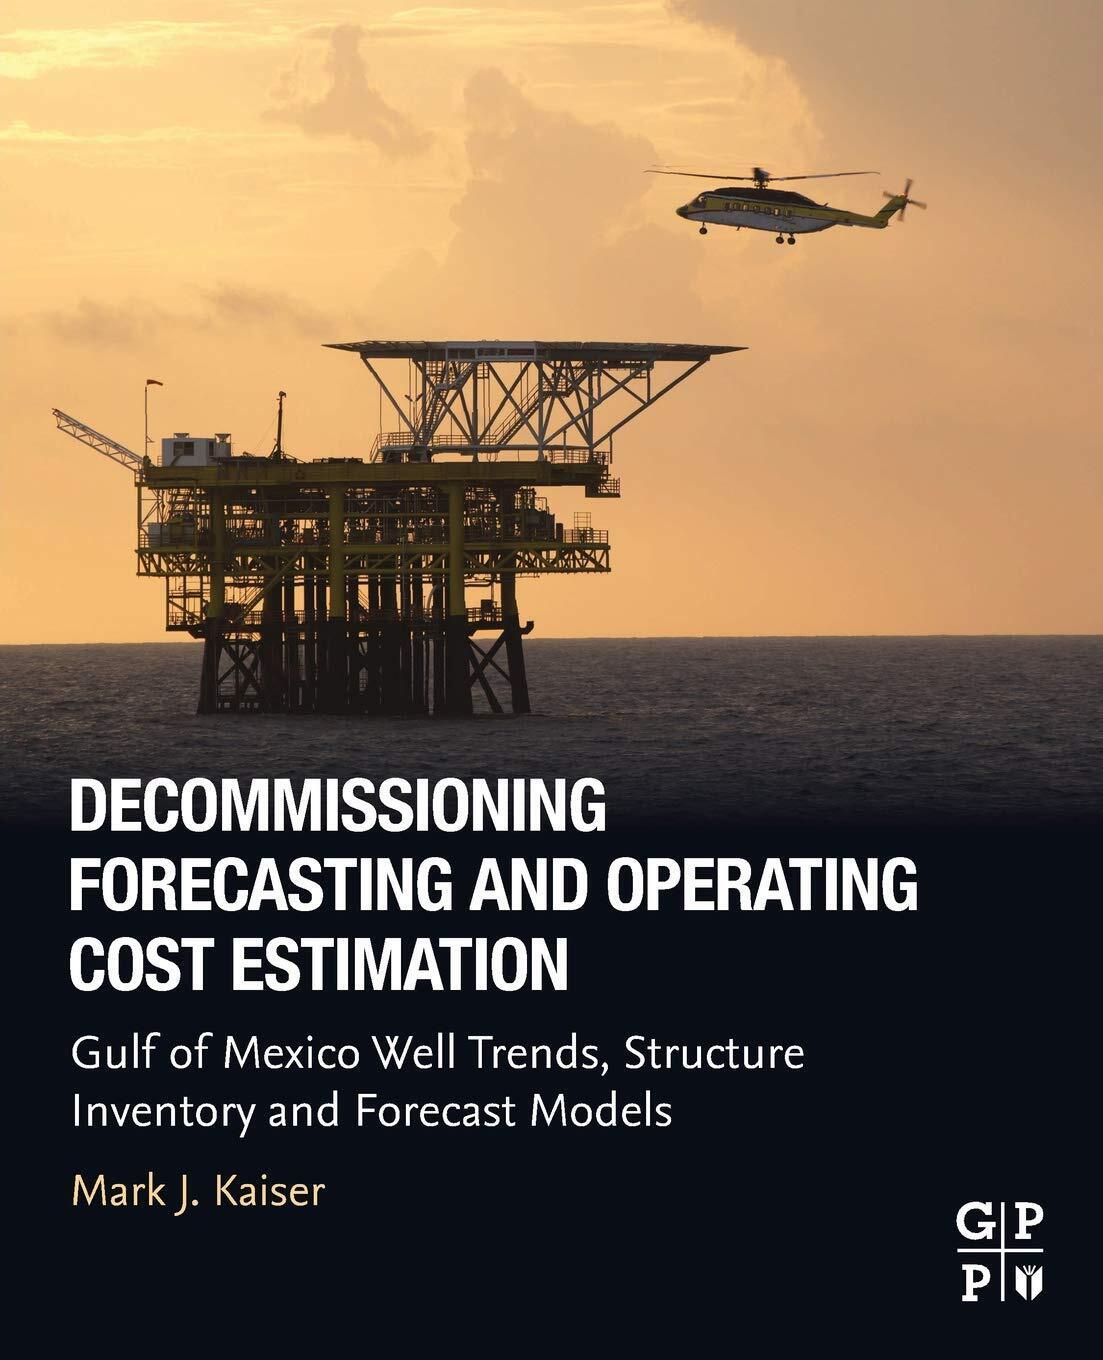 Decommissioning Forecasting and Operating Cost Estimation - Mark J. Kaiser-2019